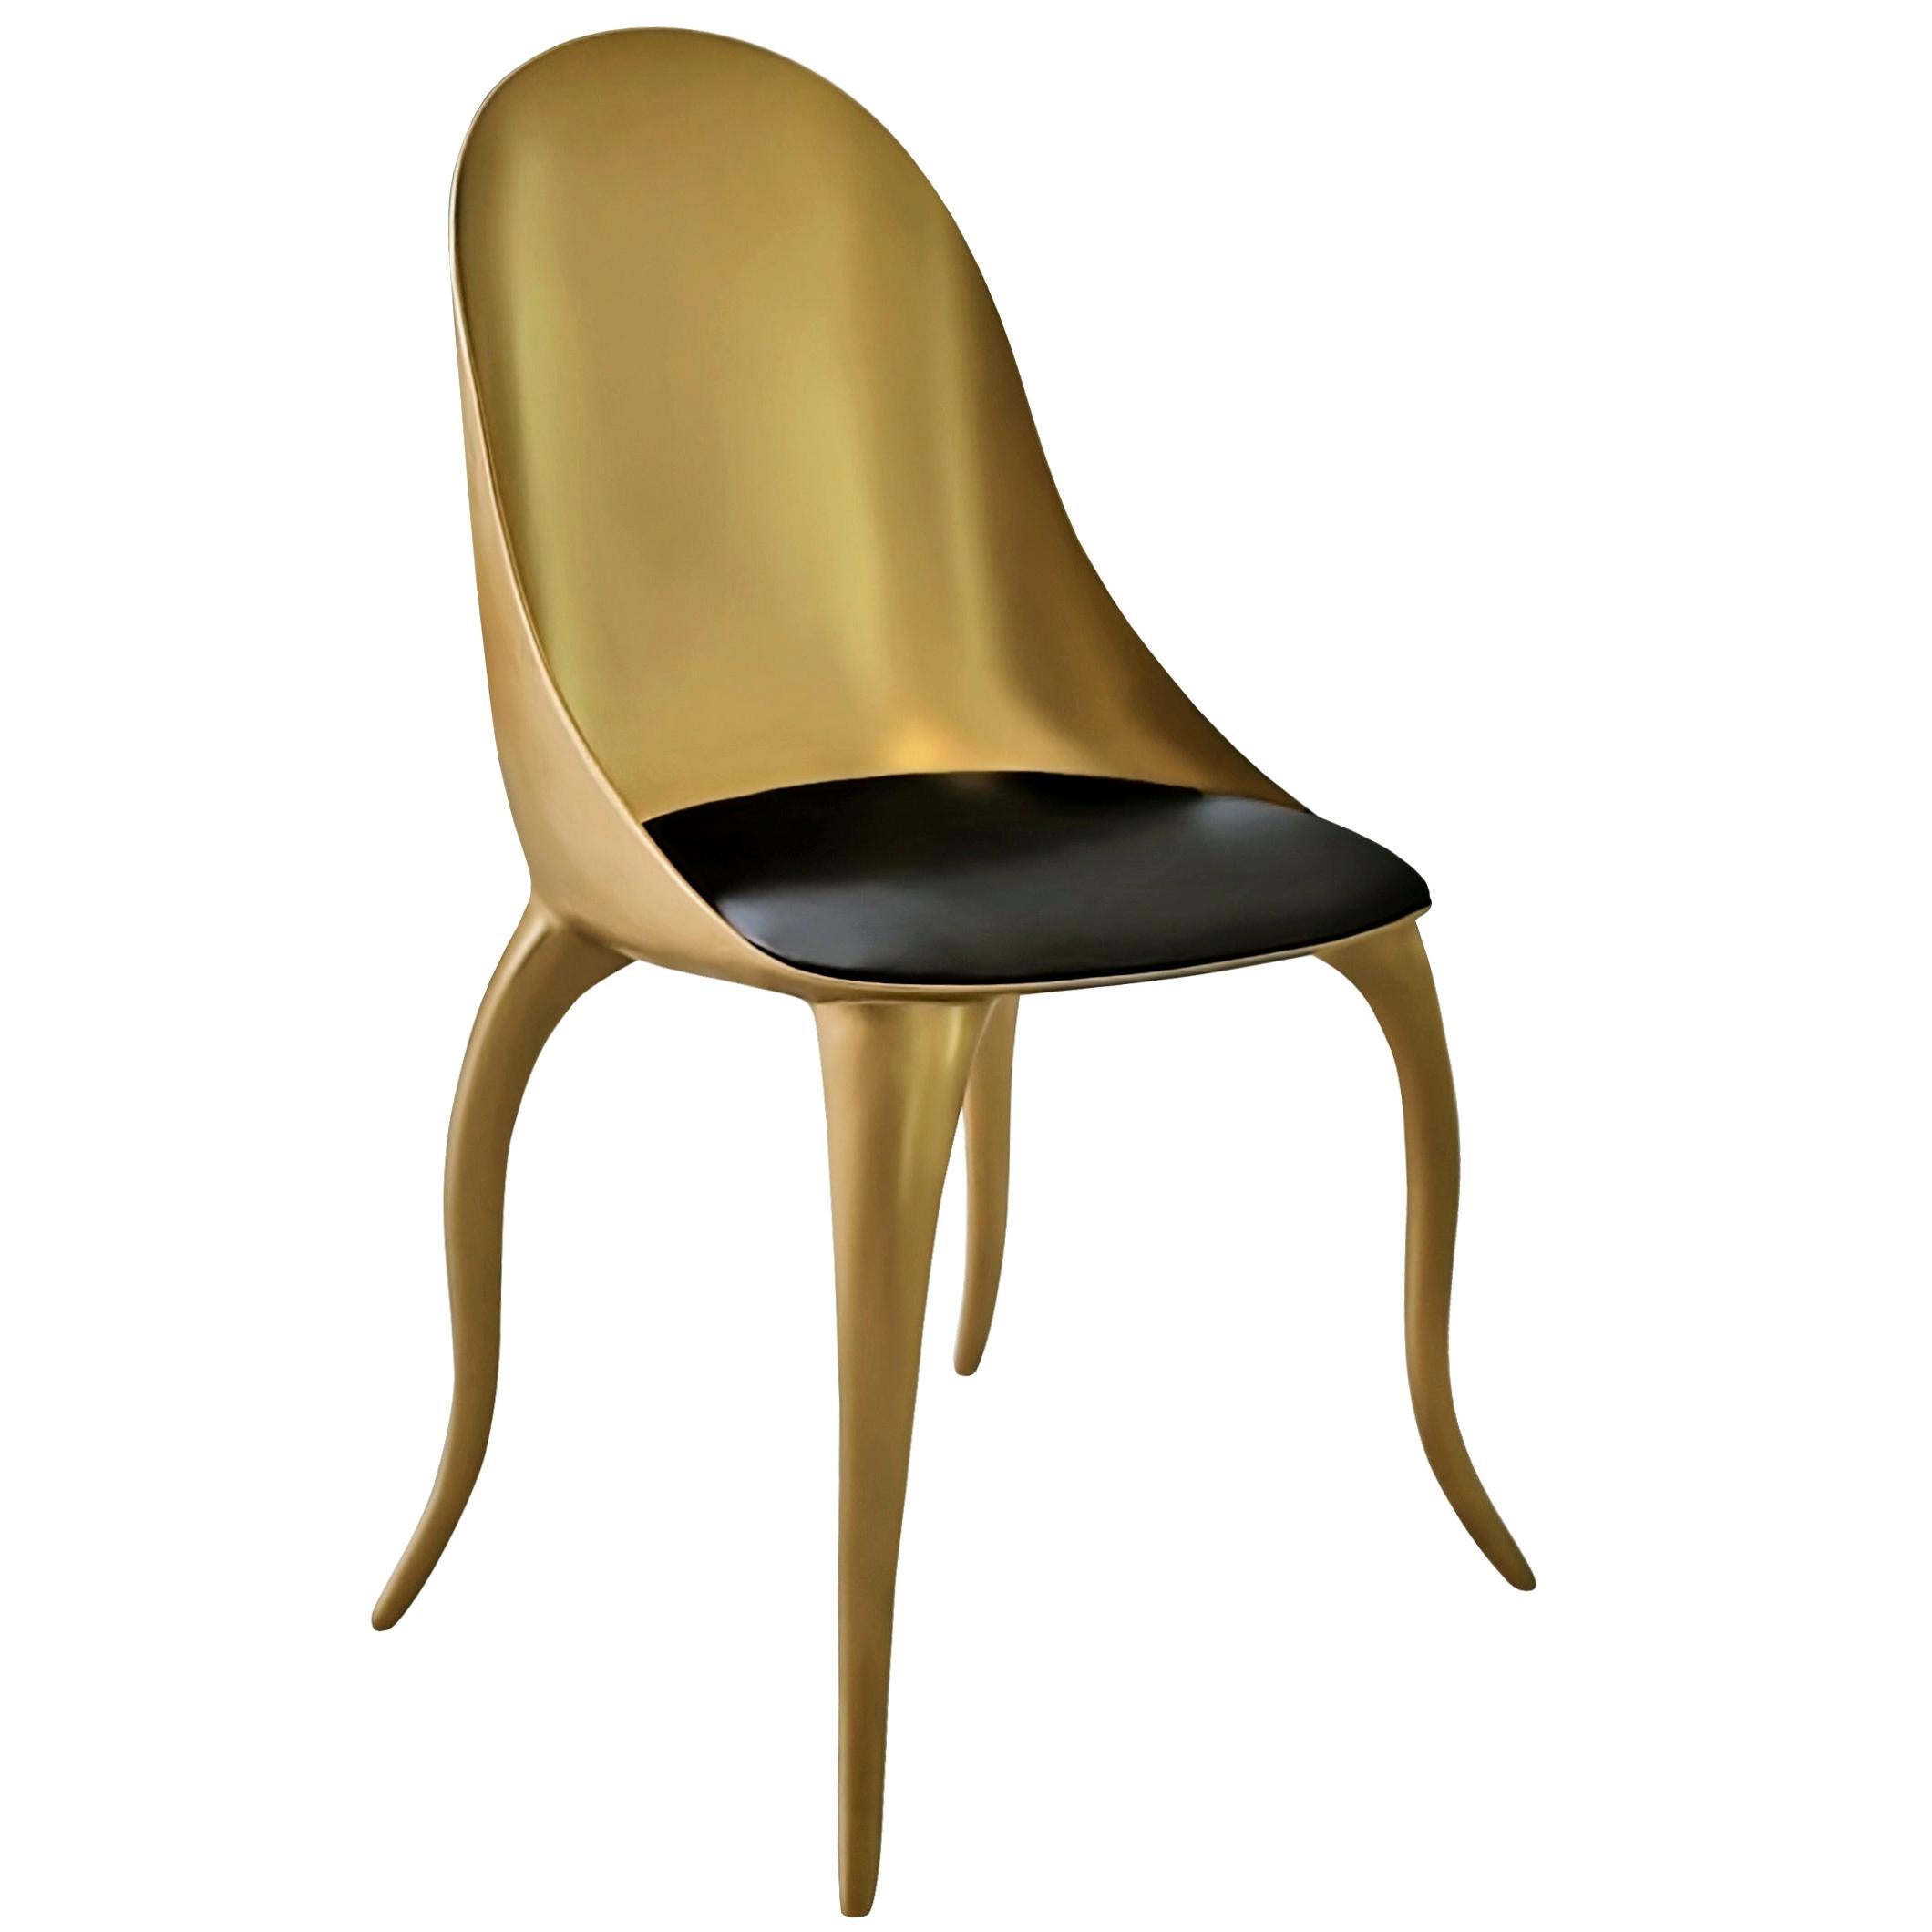 Sculptural and Luxurious "Star" Futuristic Organic Gilt Dining and Living Chair For Sale